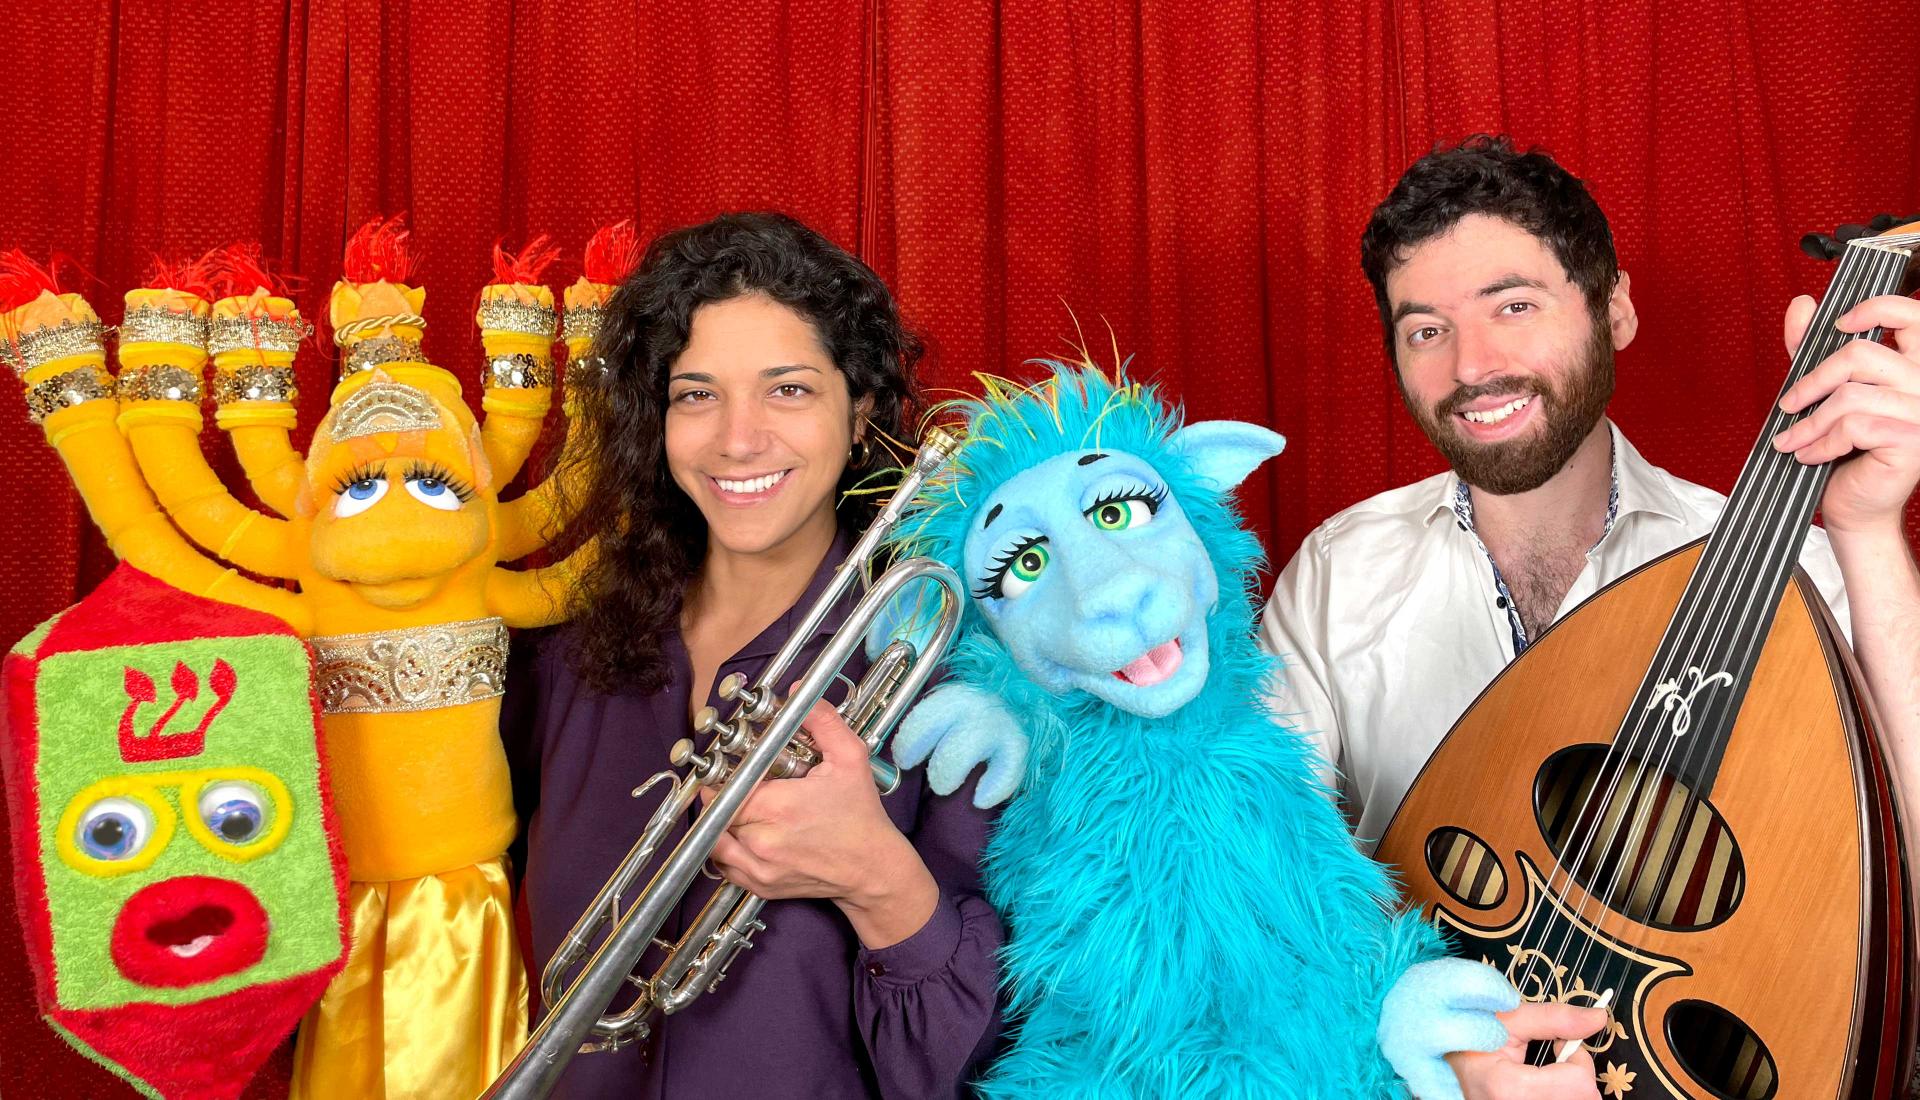 Two people holding instruments are surrounded by three plush creatures in the form of a menorah, a dreidel and an animal.